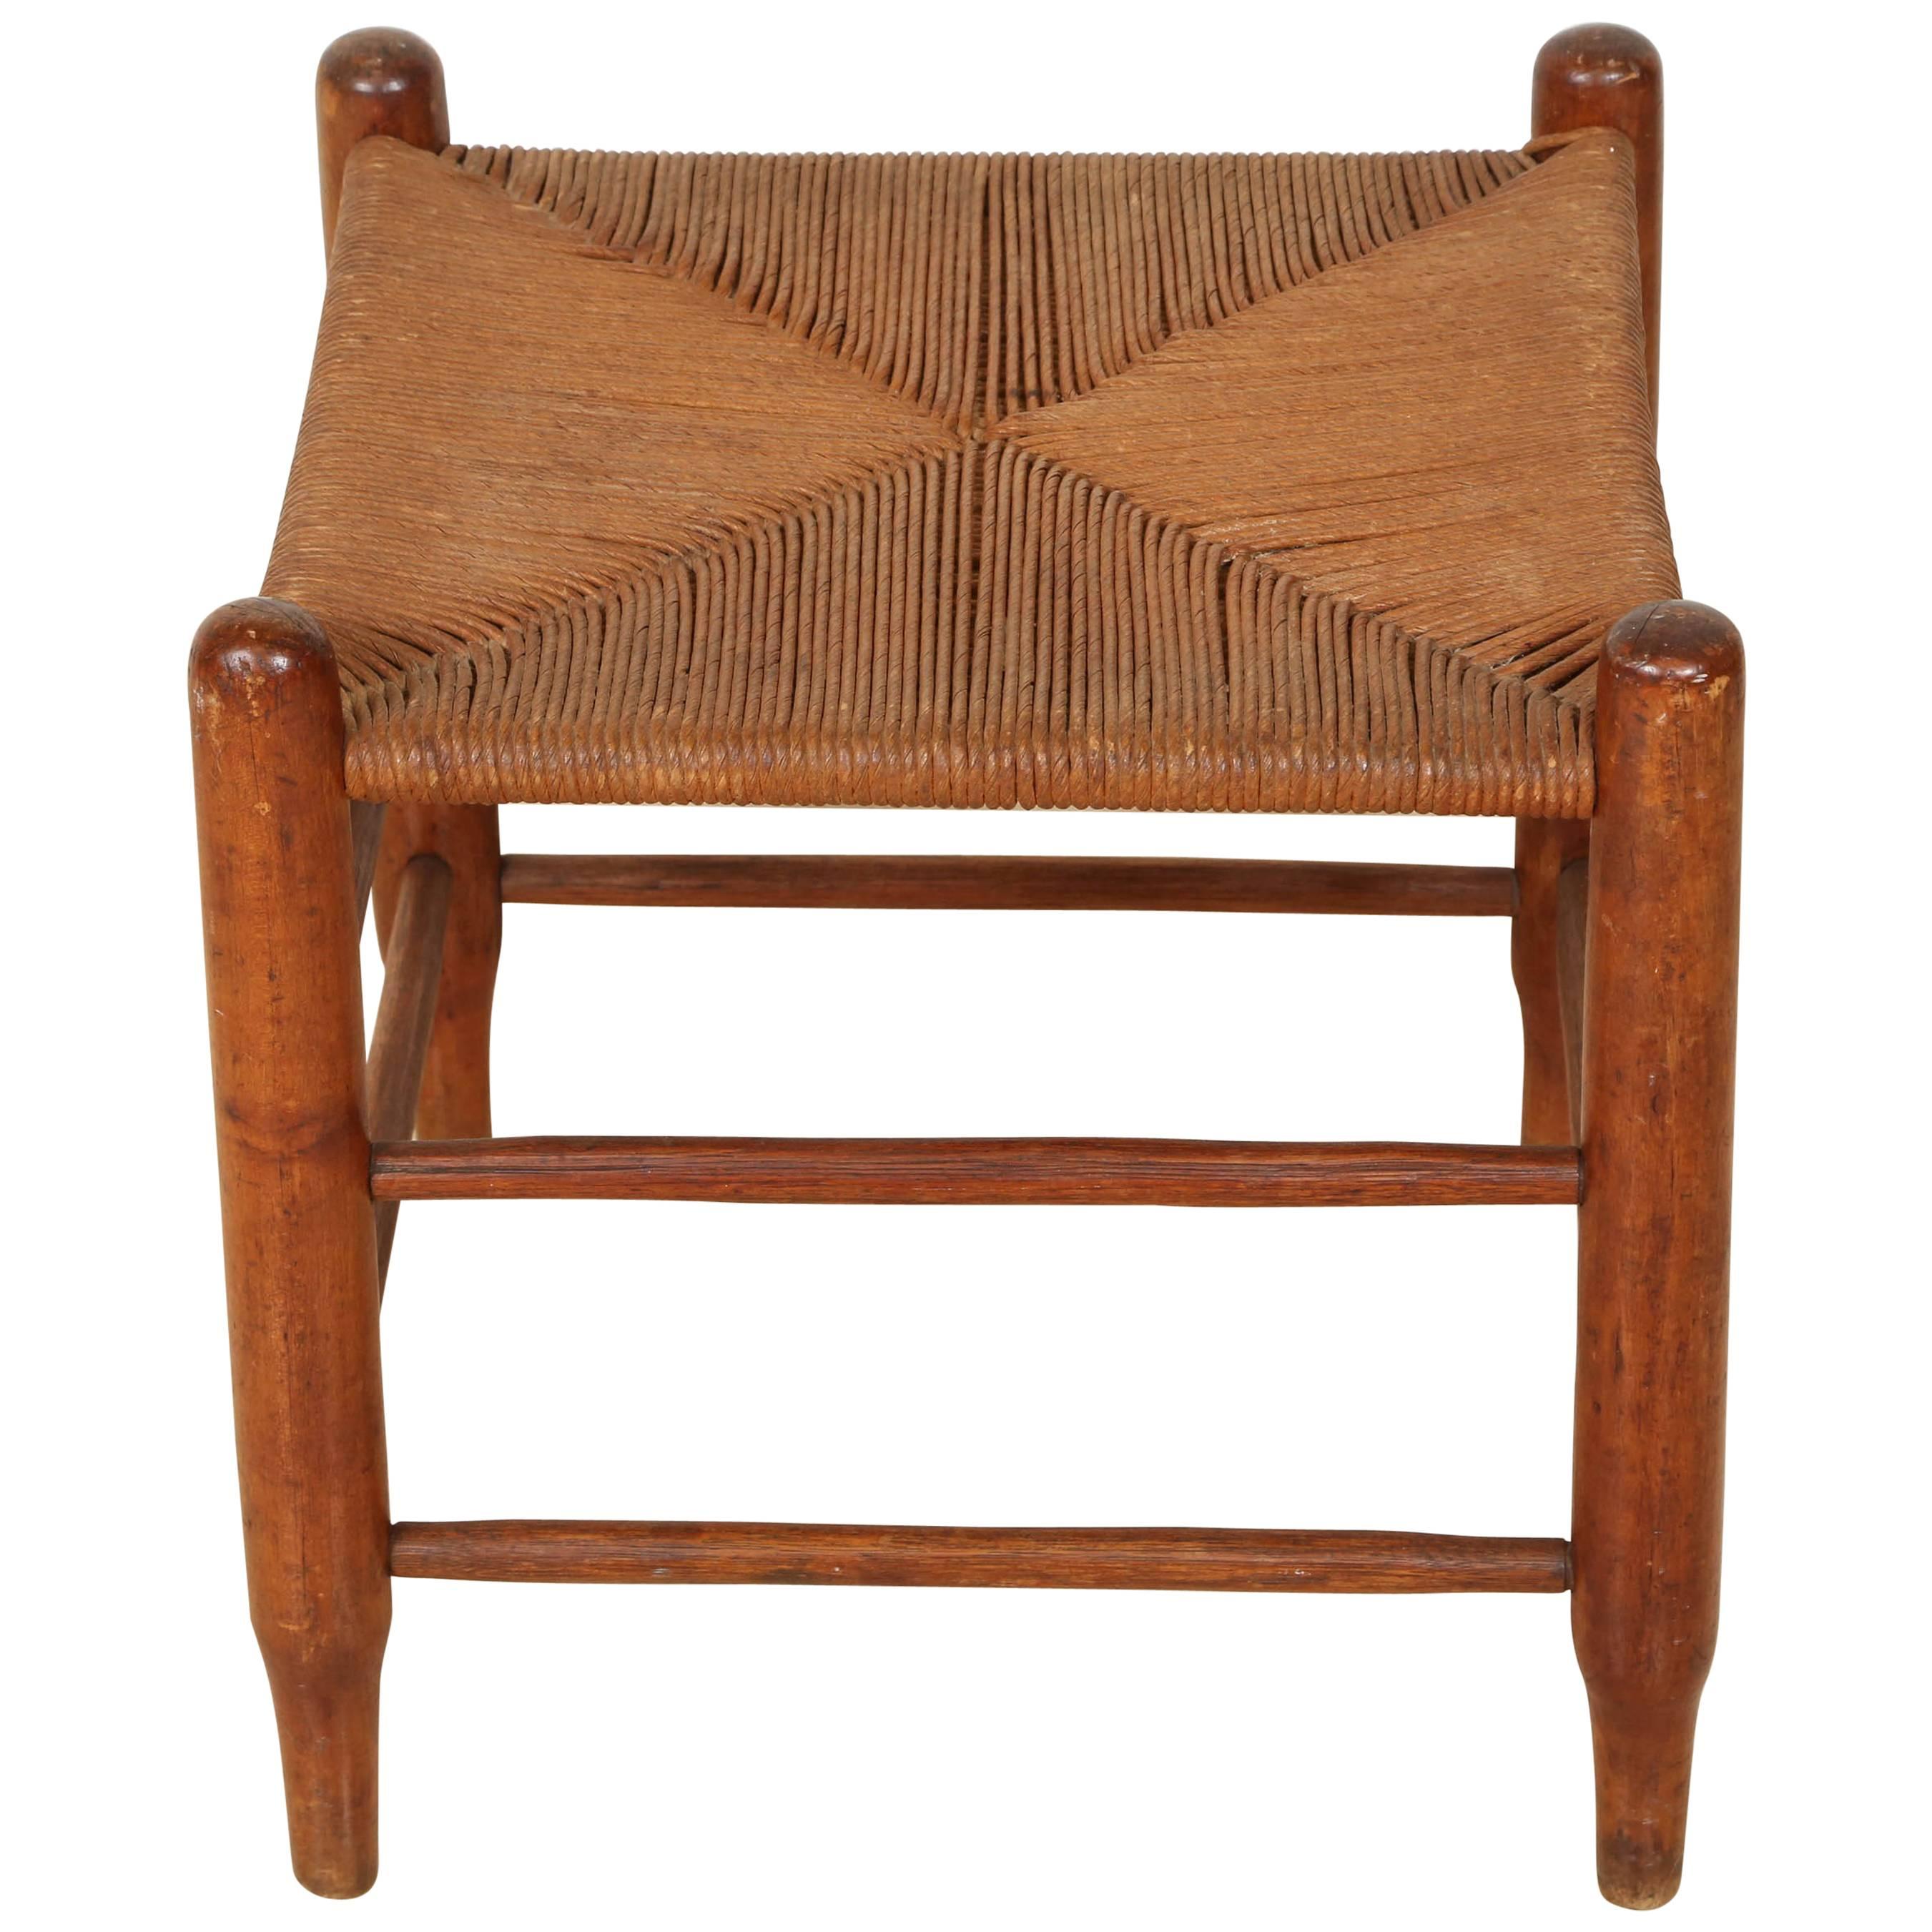 Wooden French Provincial Country Oak Stool with Woven Reed seating